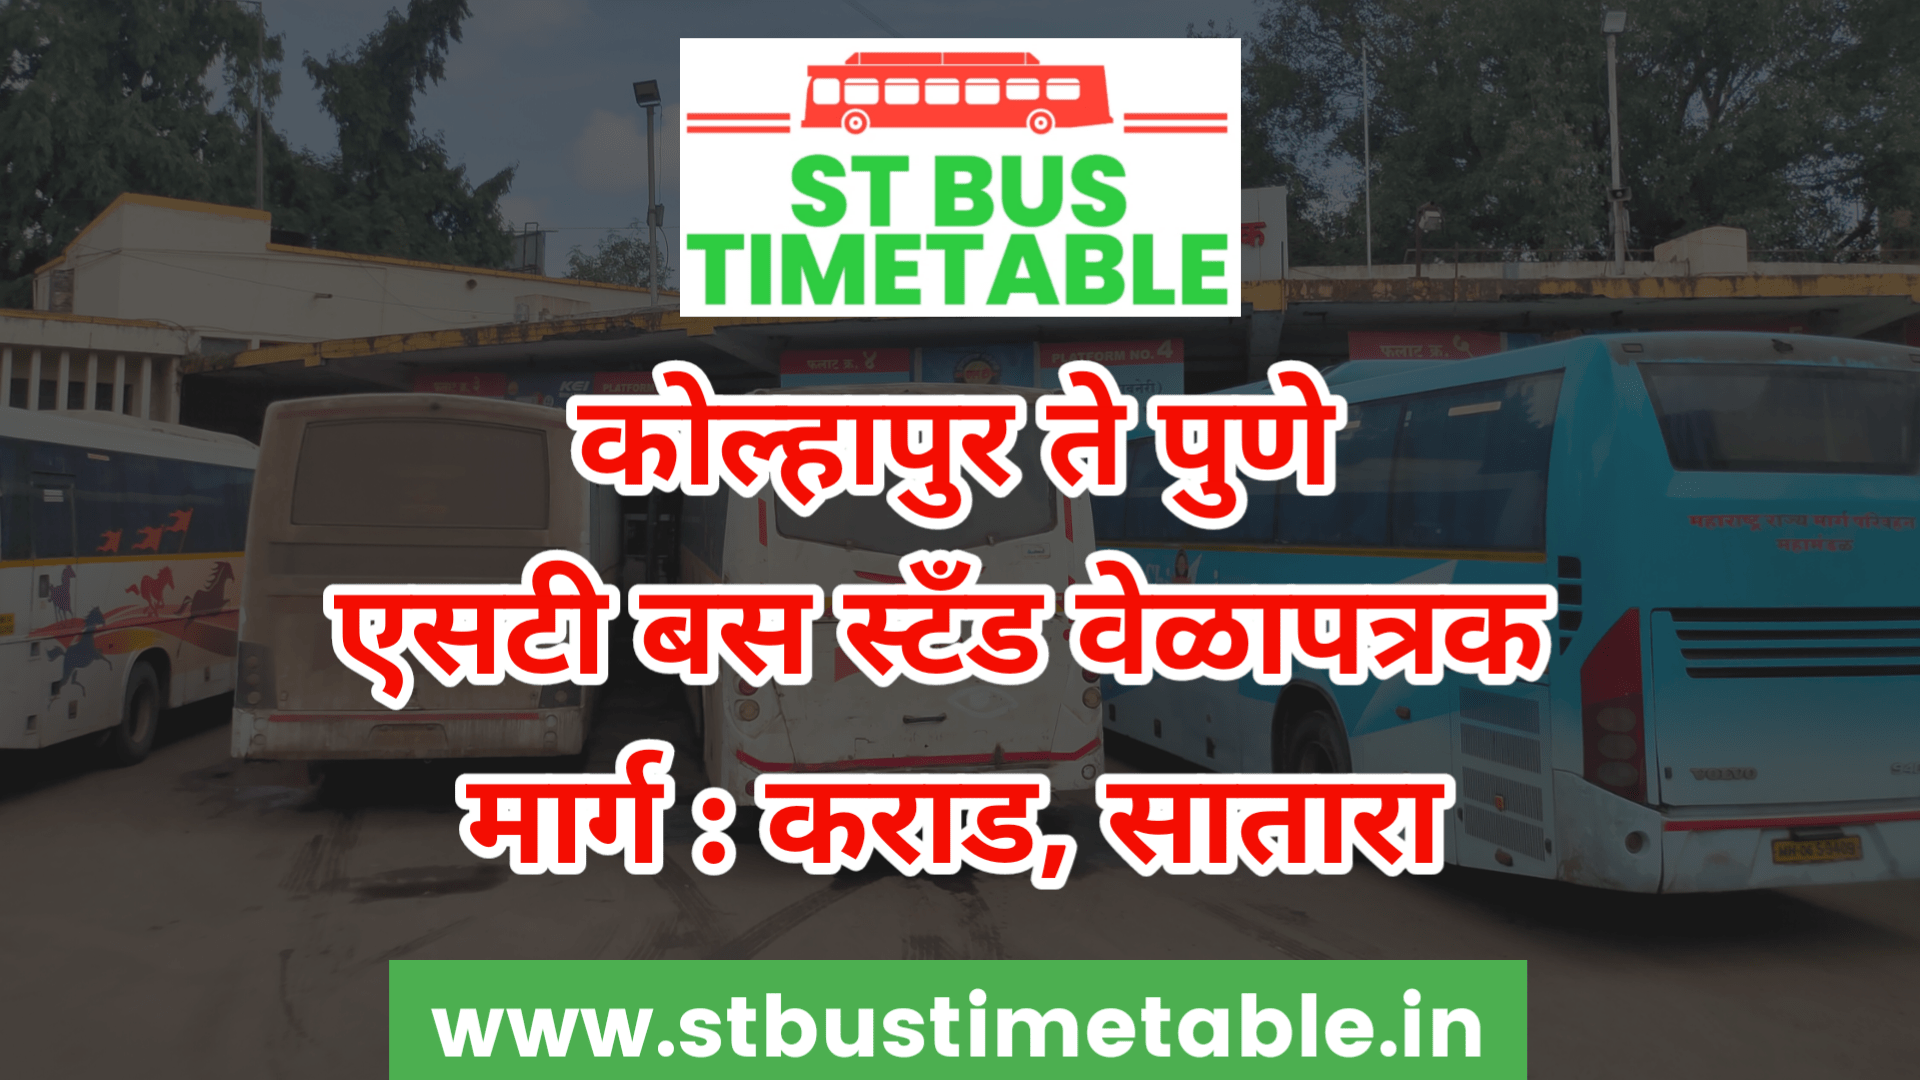 Kolhapur To Pune Swargare Msrtc St Bus Timetable Stbustimetable.in  